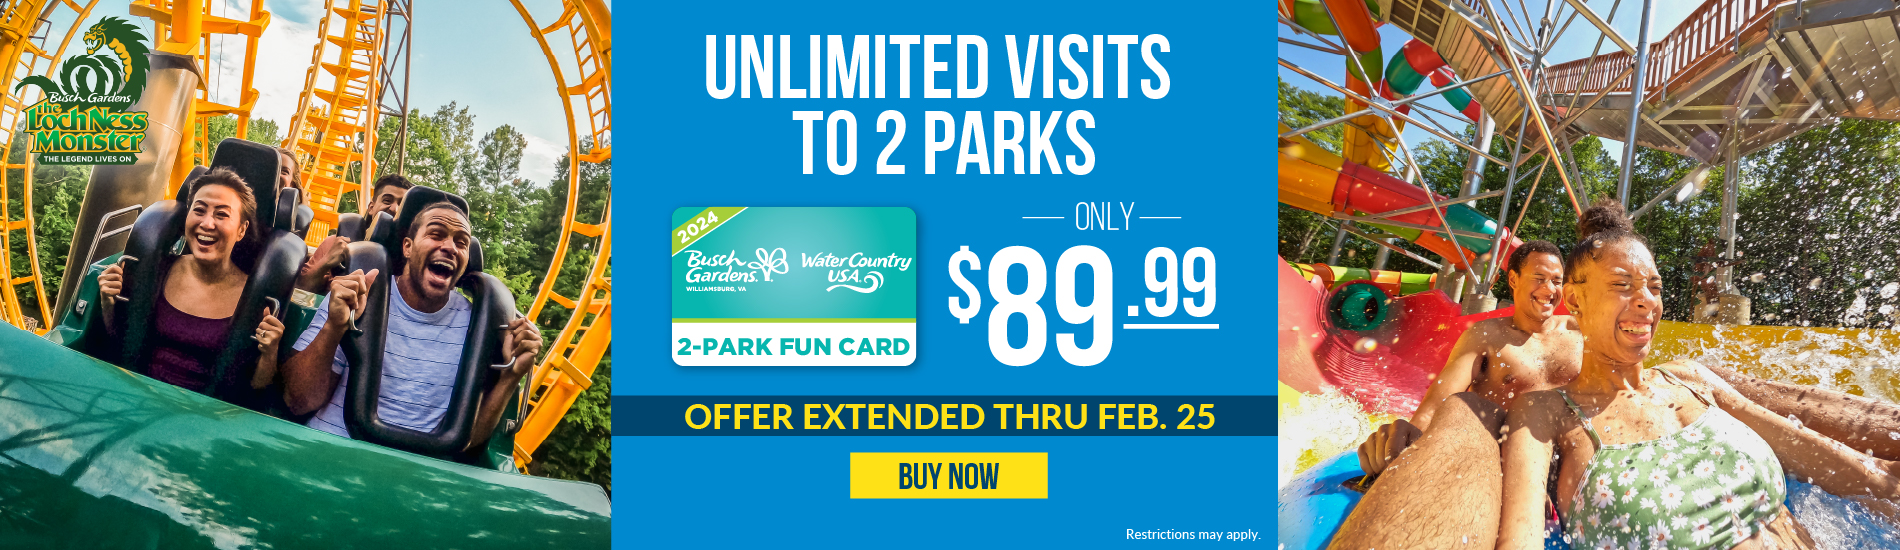 Unlimited visits to 2 parks only $89.99